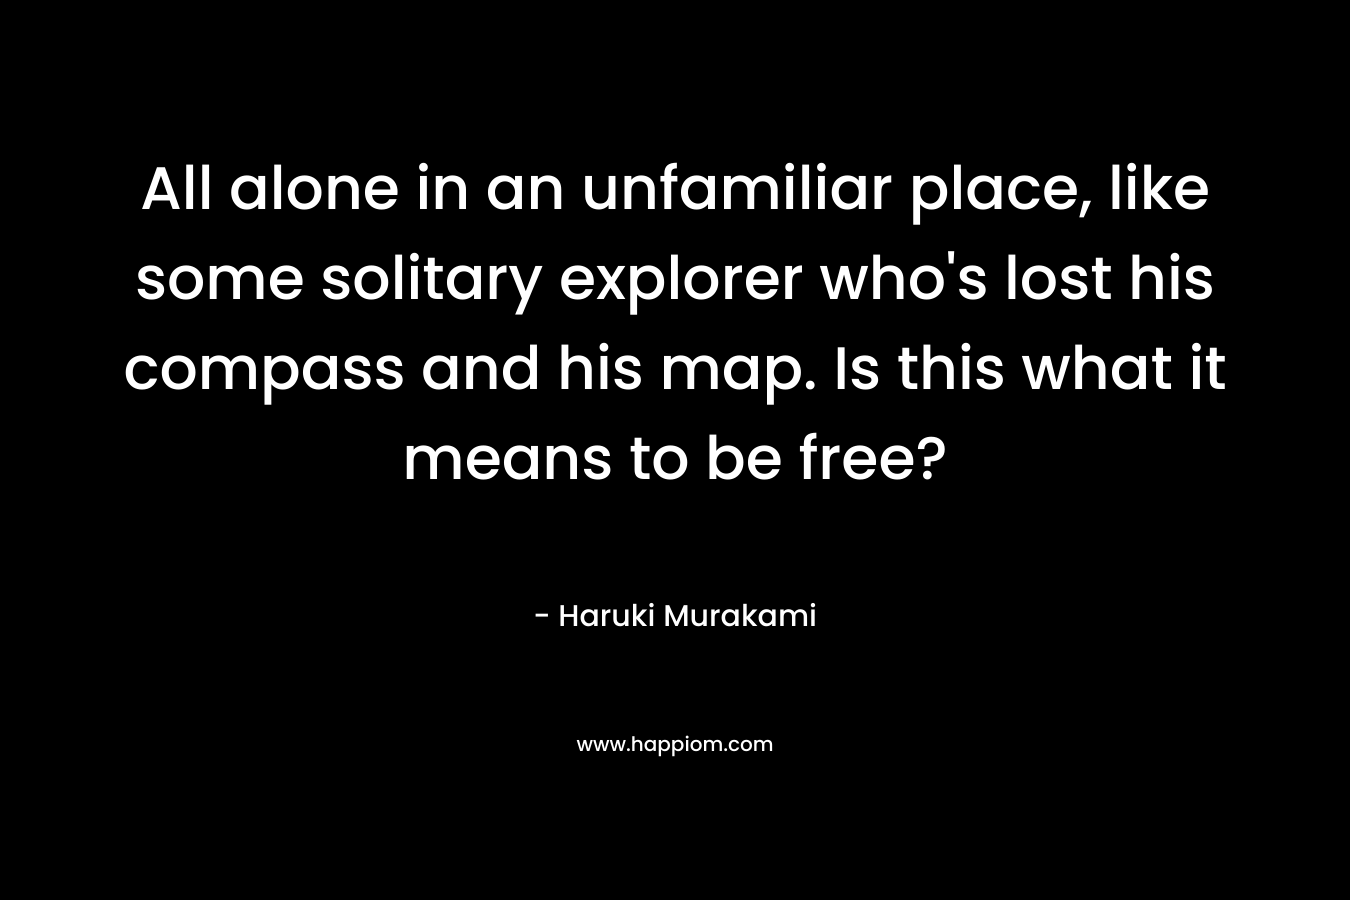 All alone in an unfamiliar place, like some solitary explorer who's lost his compass and his map. Is this what it means to be free?